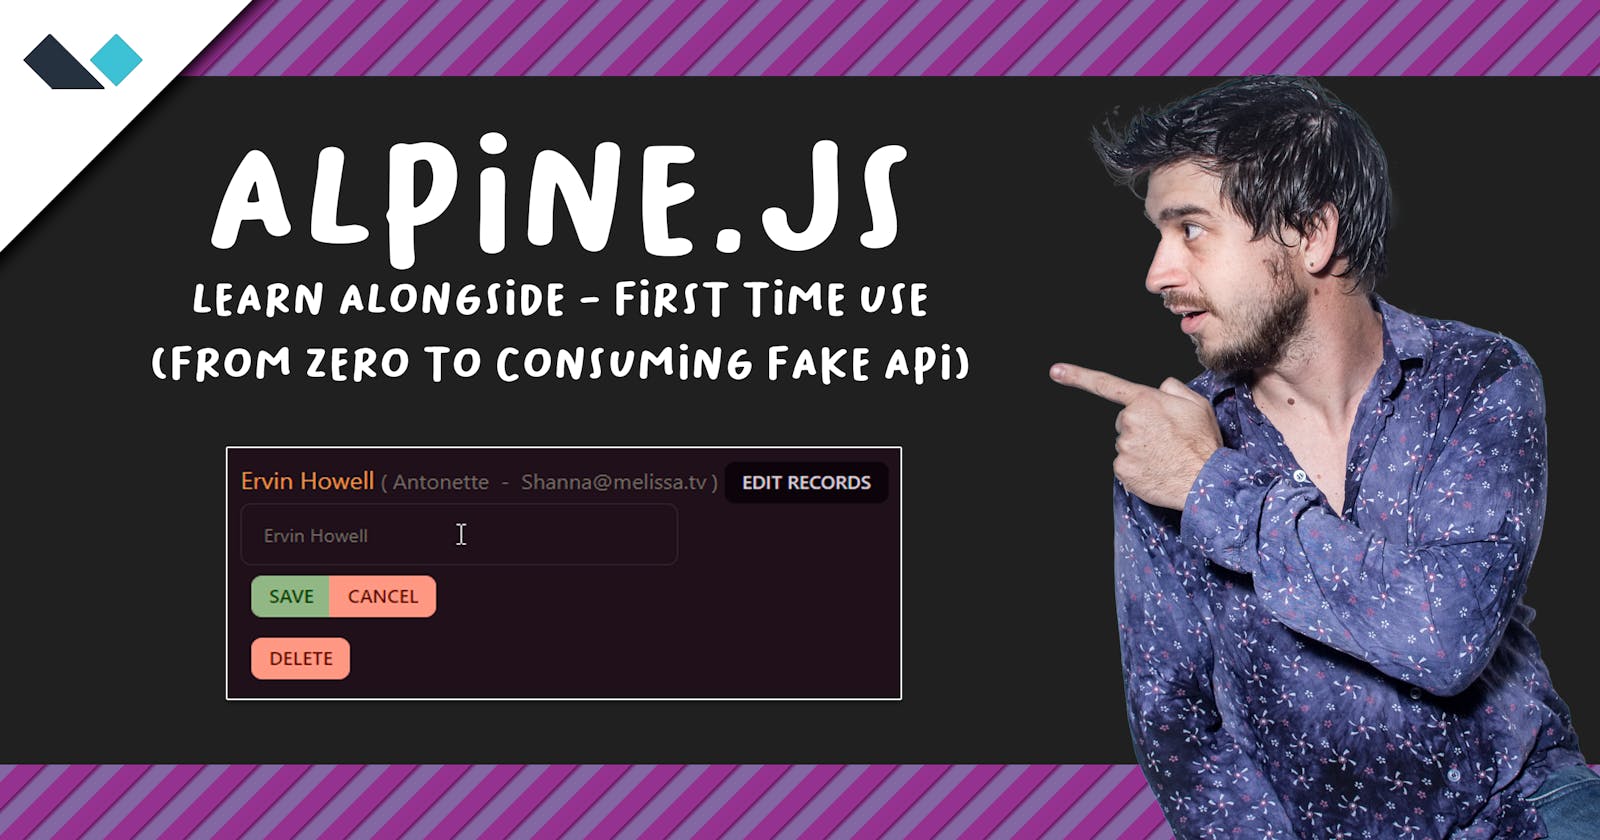 Learning together challenge: Alpine.js and Fake API (first time use)